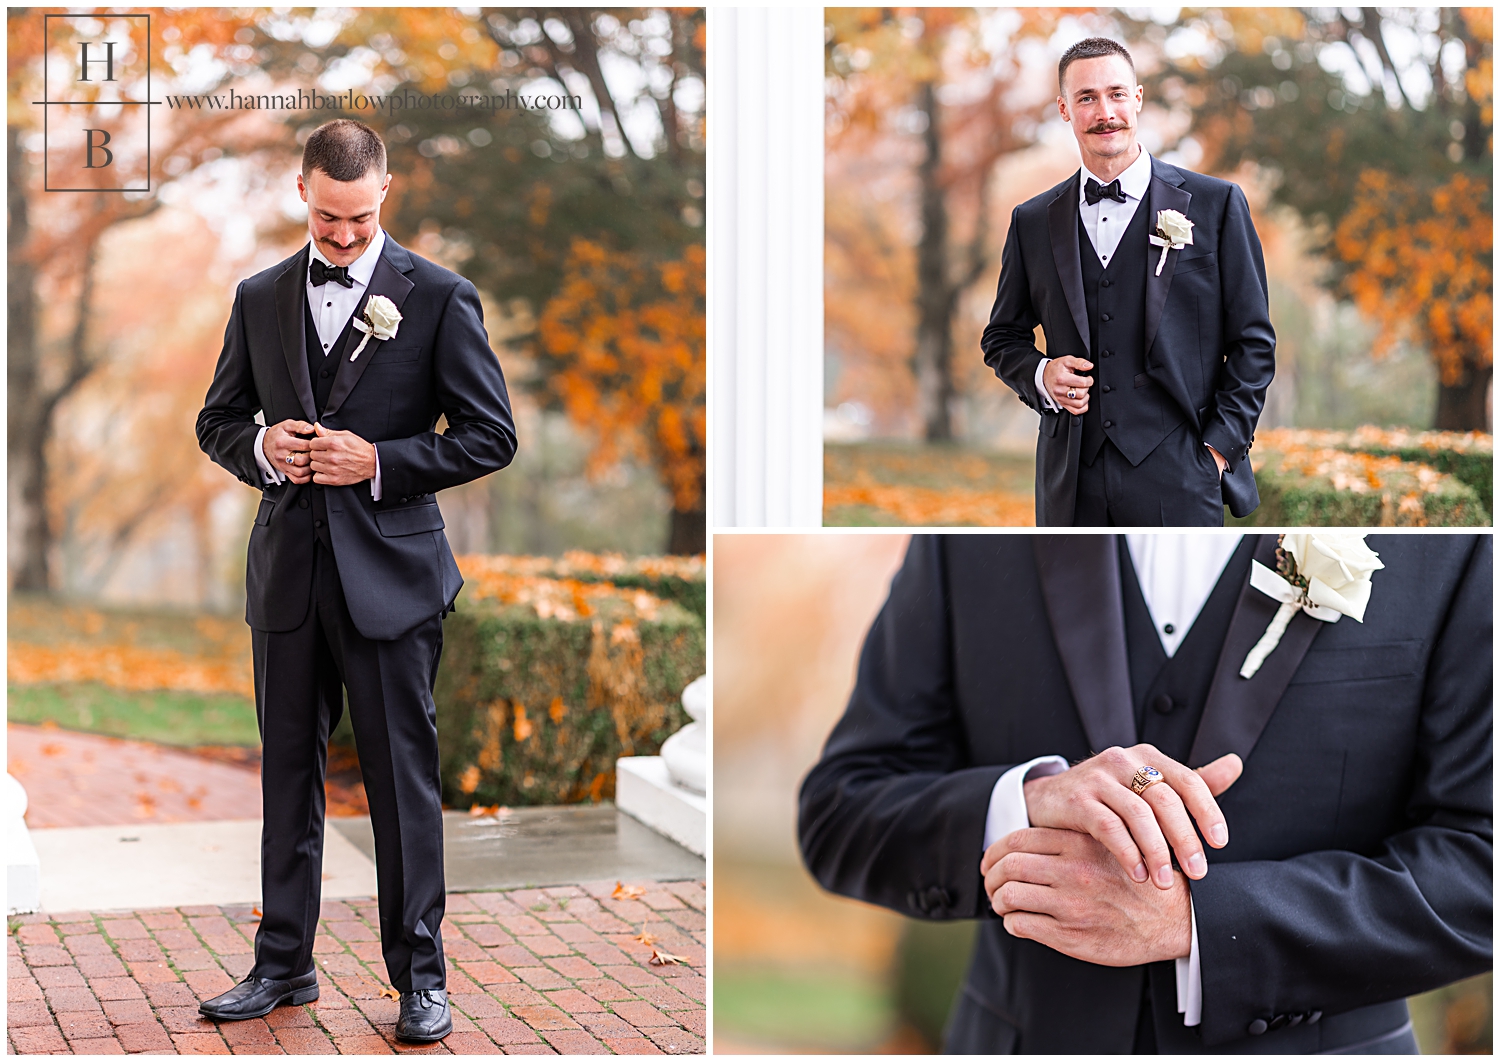 Groom in black tux poses in front of orange fall foliage trees